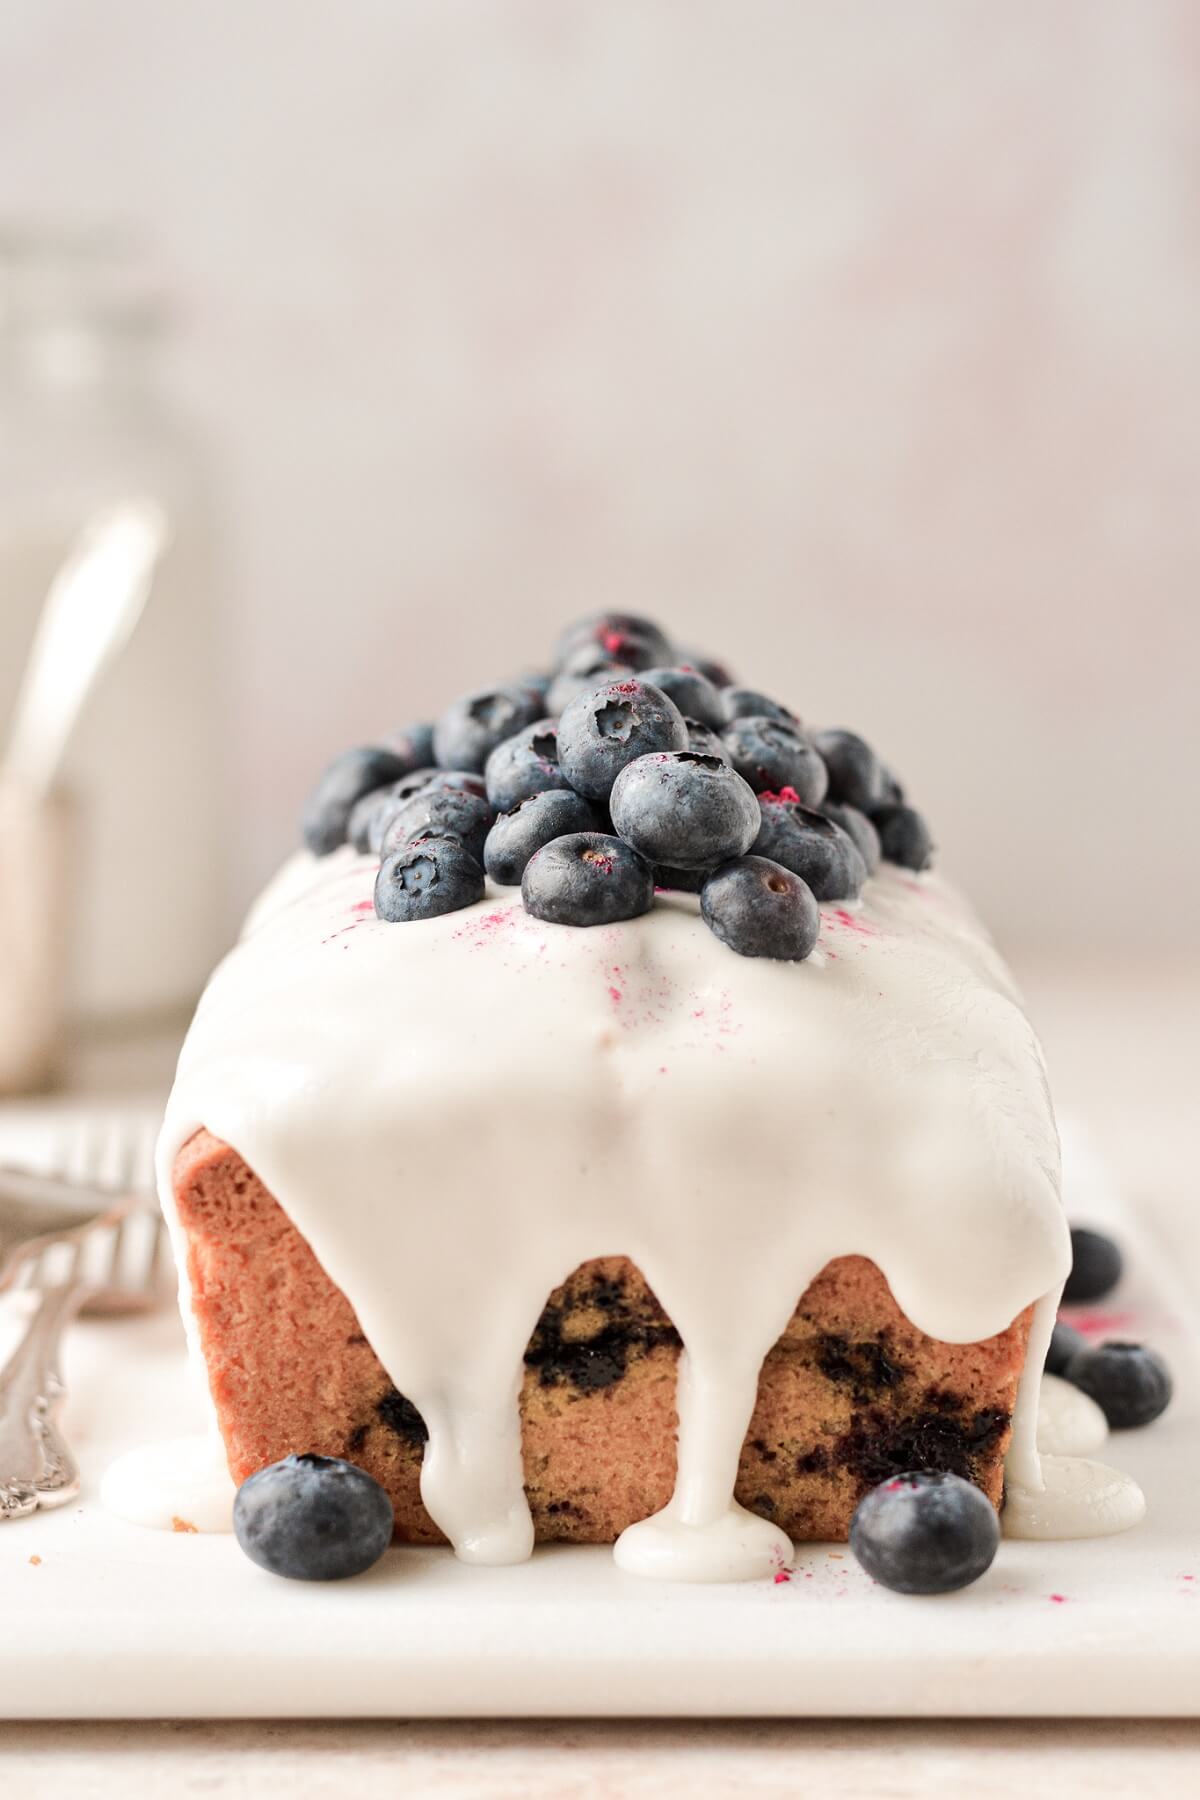 Lemon icing dripping down a lemon blueberry loaf cake.